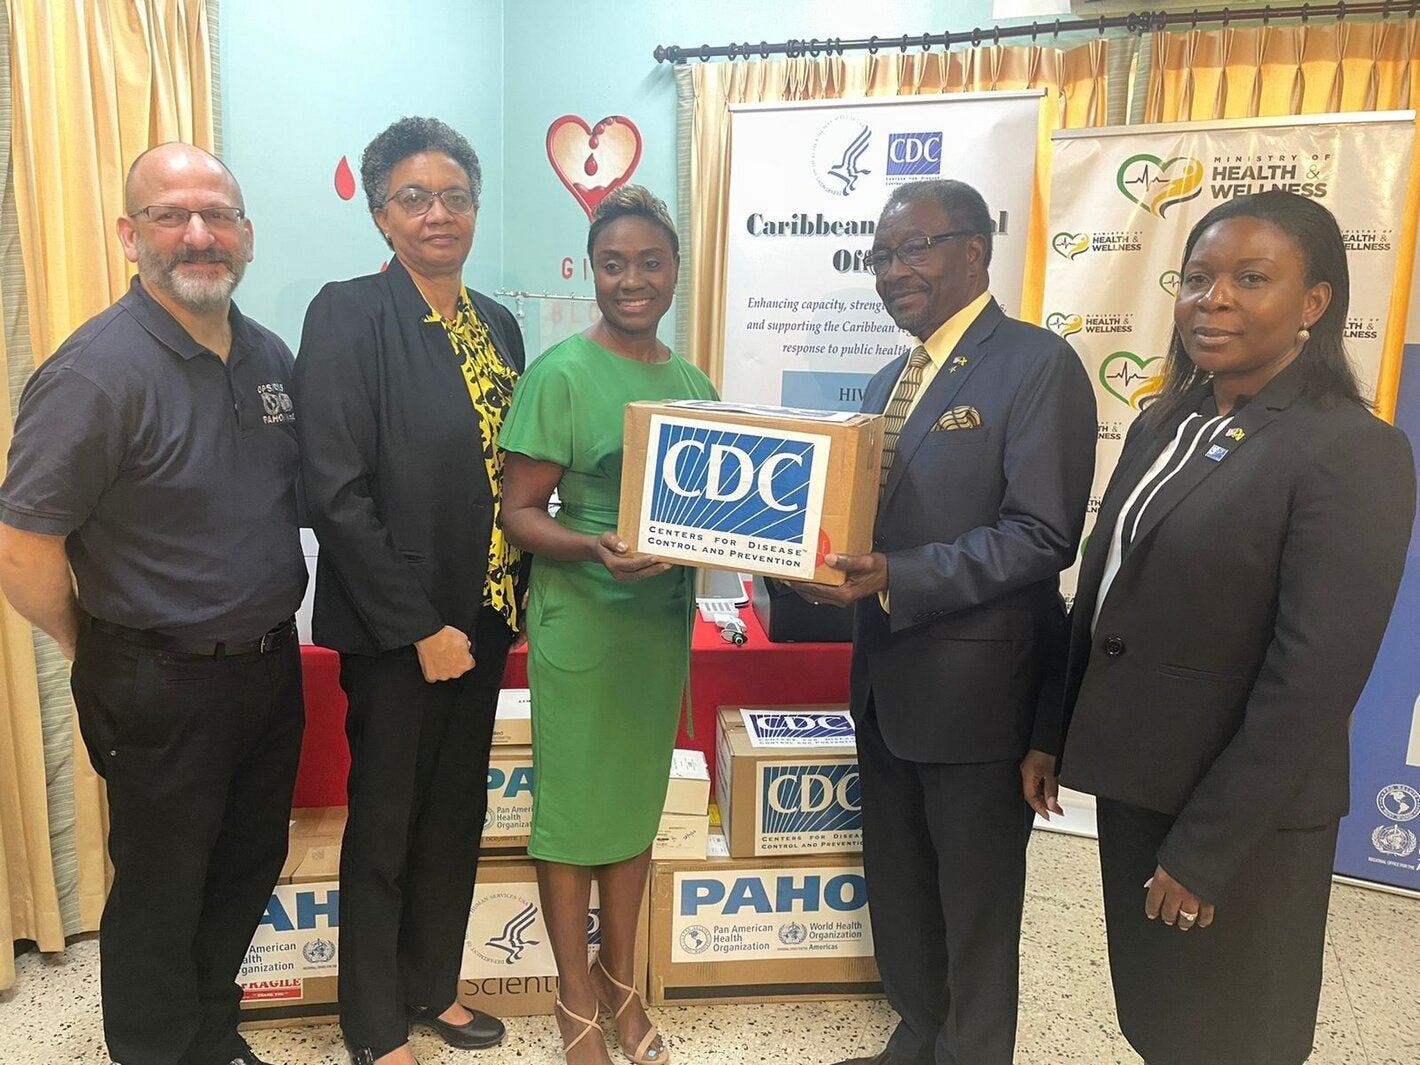 U.S. Ambassador Nick Perry (2nd right) pictured with Hon. Julieth Cuthbert-Flynn, Minister of State, Ministry of Health and Wellness (3rd left) while (L-R) Mr. Ian Stein, Pan American Health Organization/ World Health Organization Representative to Jamaica, Dr. Marlene Tapper, Director of the National Laboratory Services and Dr. Emily Kainne Dokubo, Country Director, U.S. Centres for Disease Control & Prevention look on. 